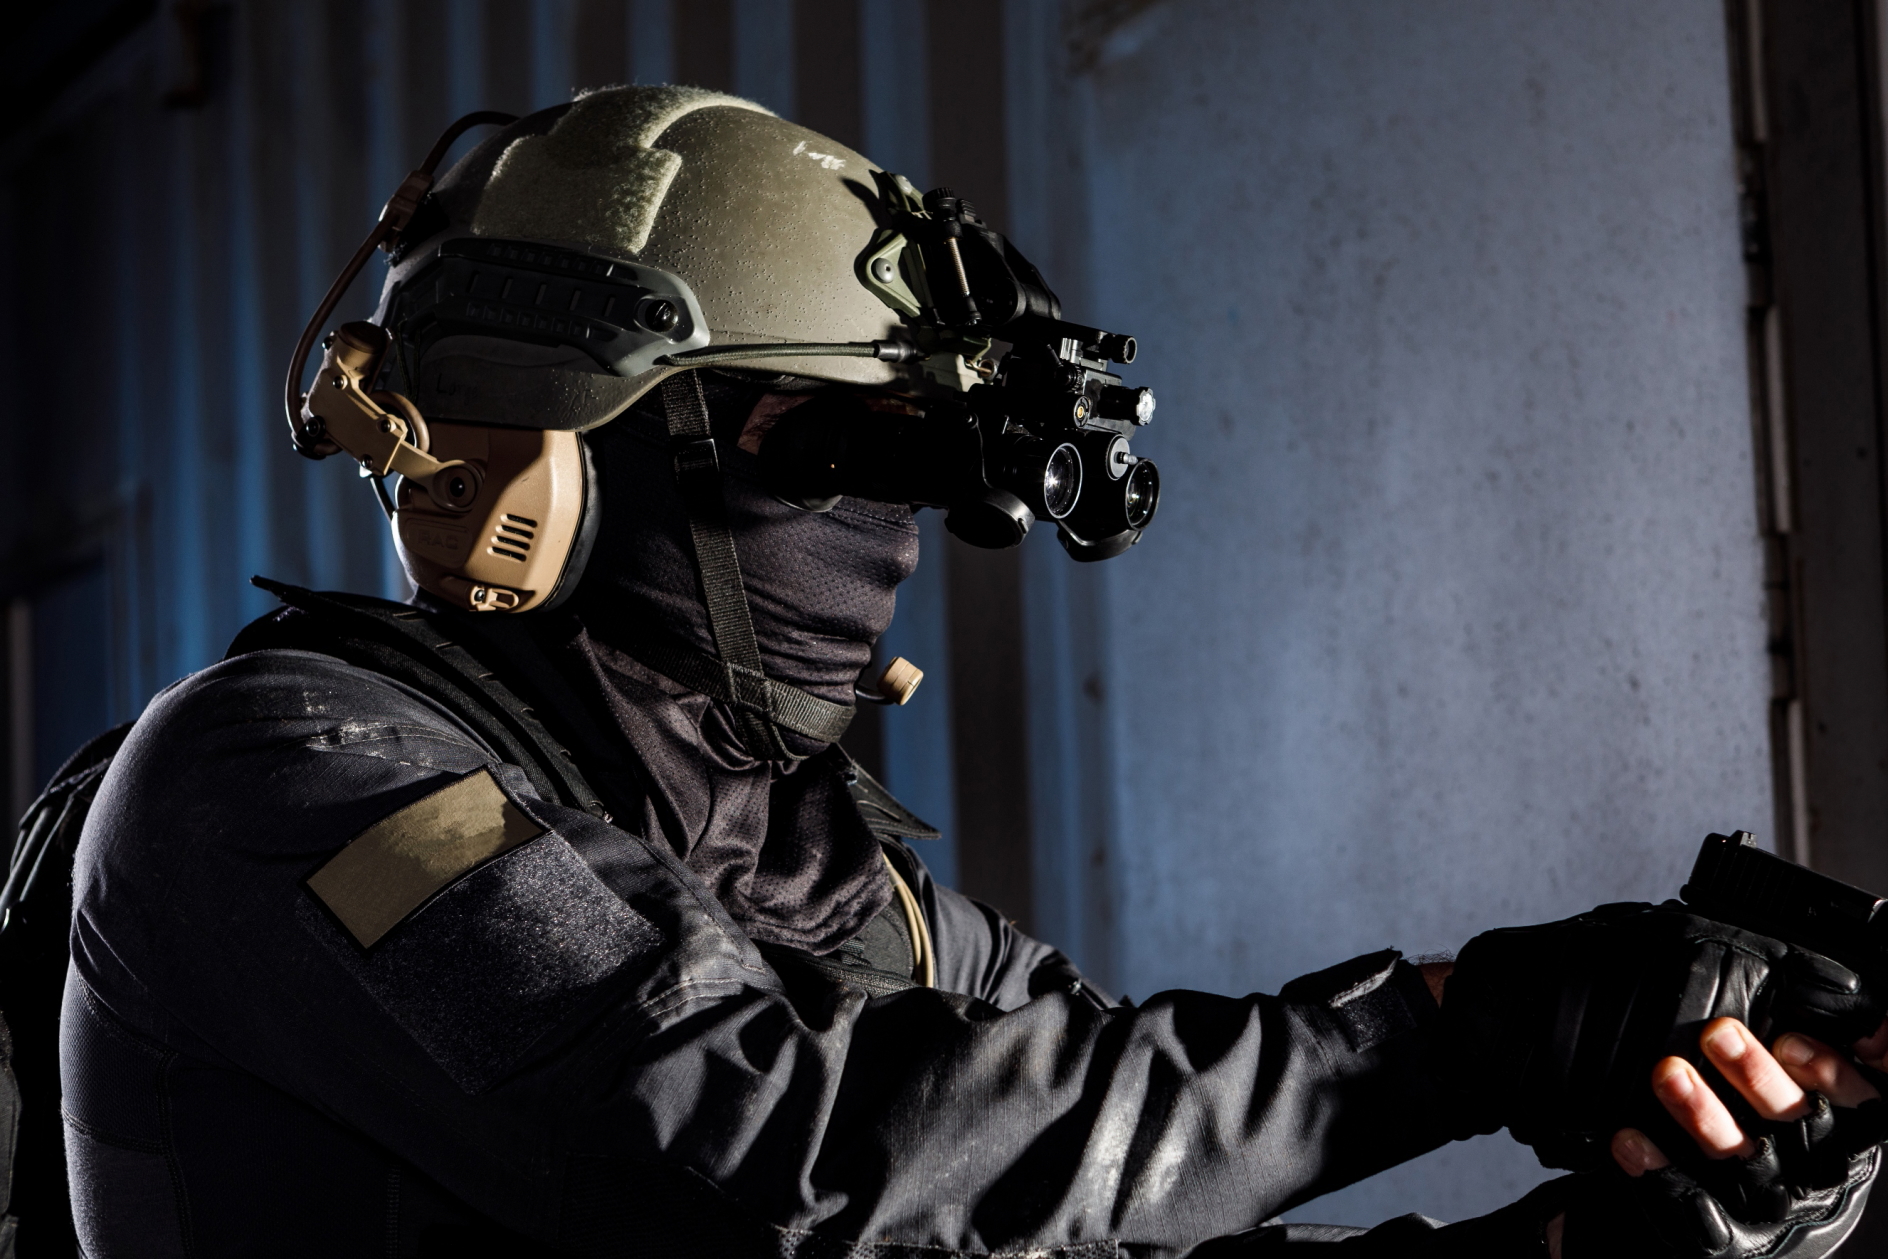 The XACT nv33 NVG from Elbit Systems will better equip the Special Forces and Special Operation Units of the German Federal Police (Bundespolizei) as they face new threats and complex scenarios from organized crime and international terrorism. Click to enlarge.